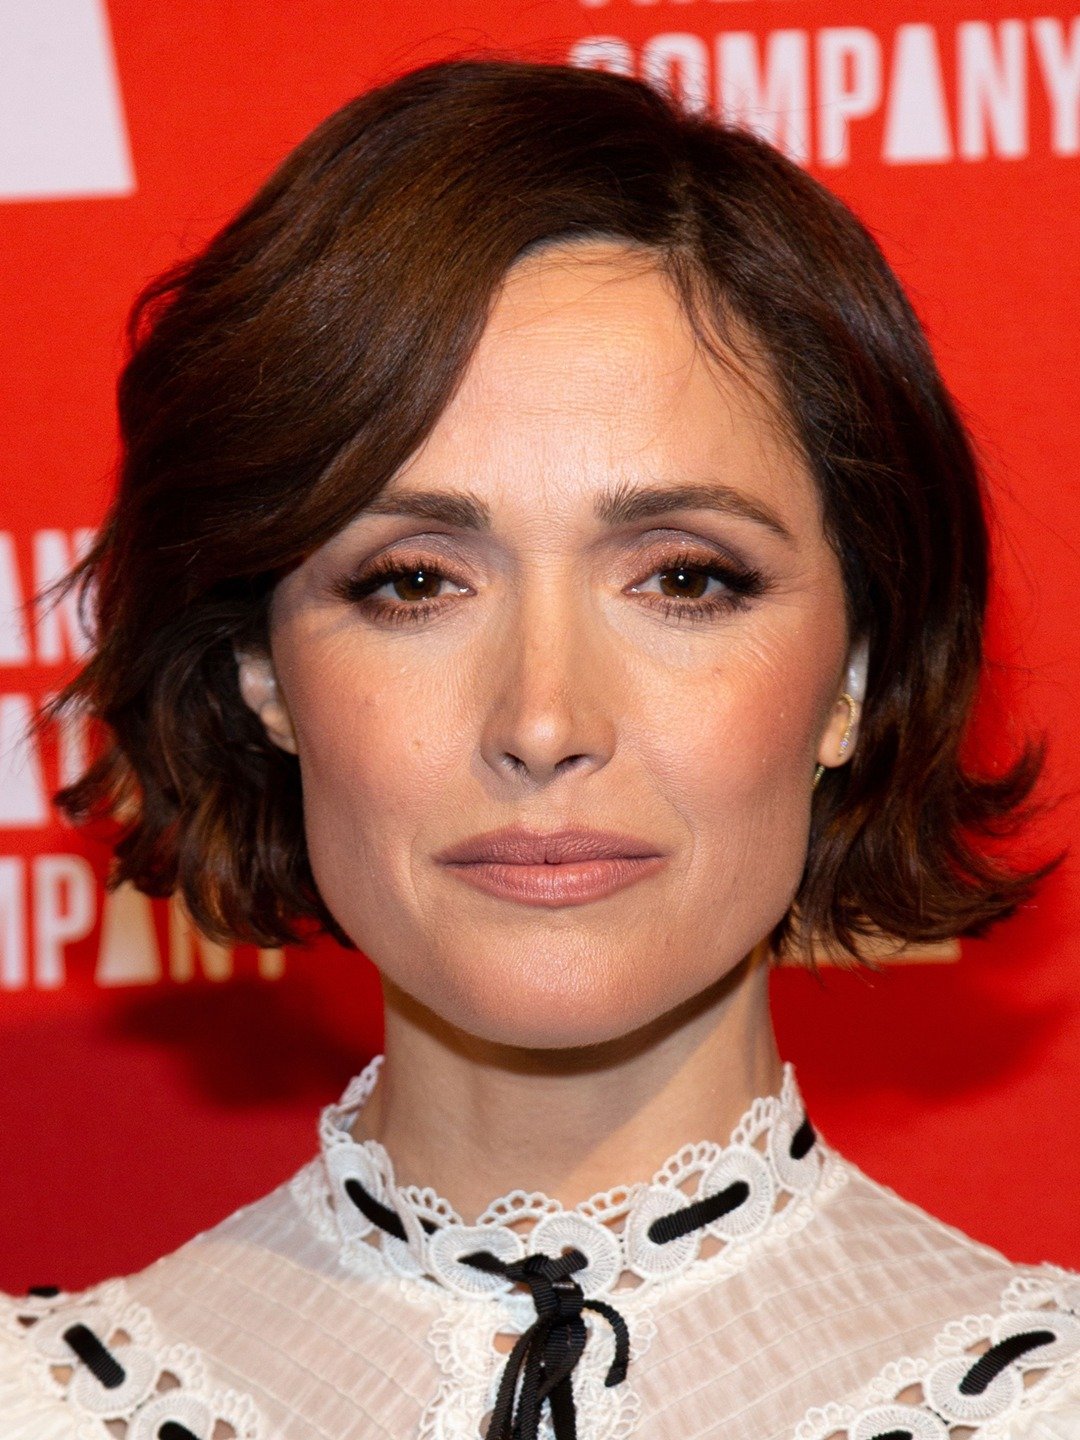 How tall is Rose Byrne?